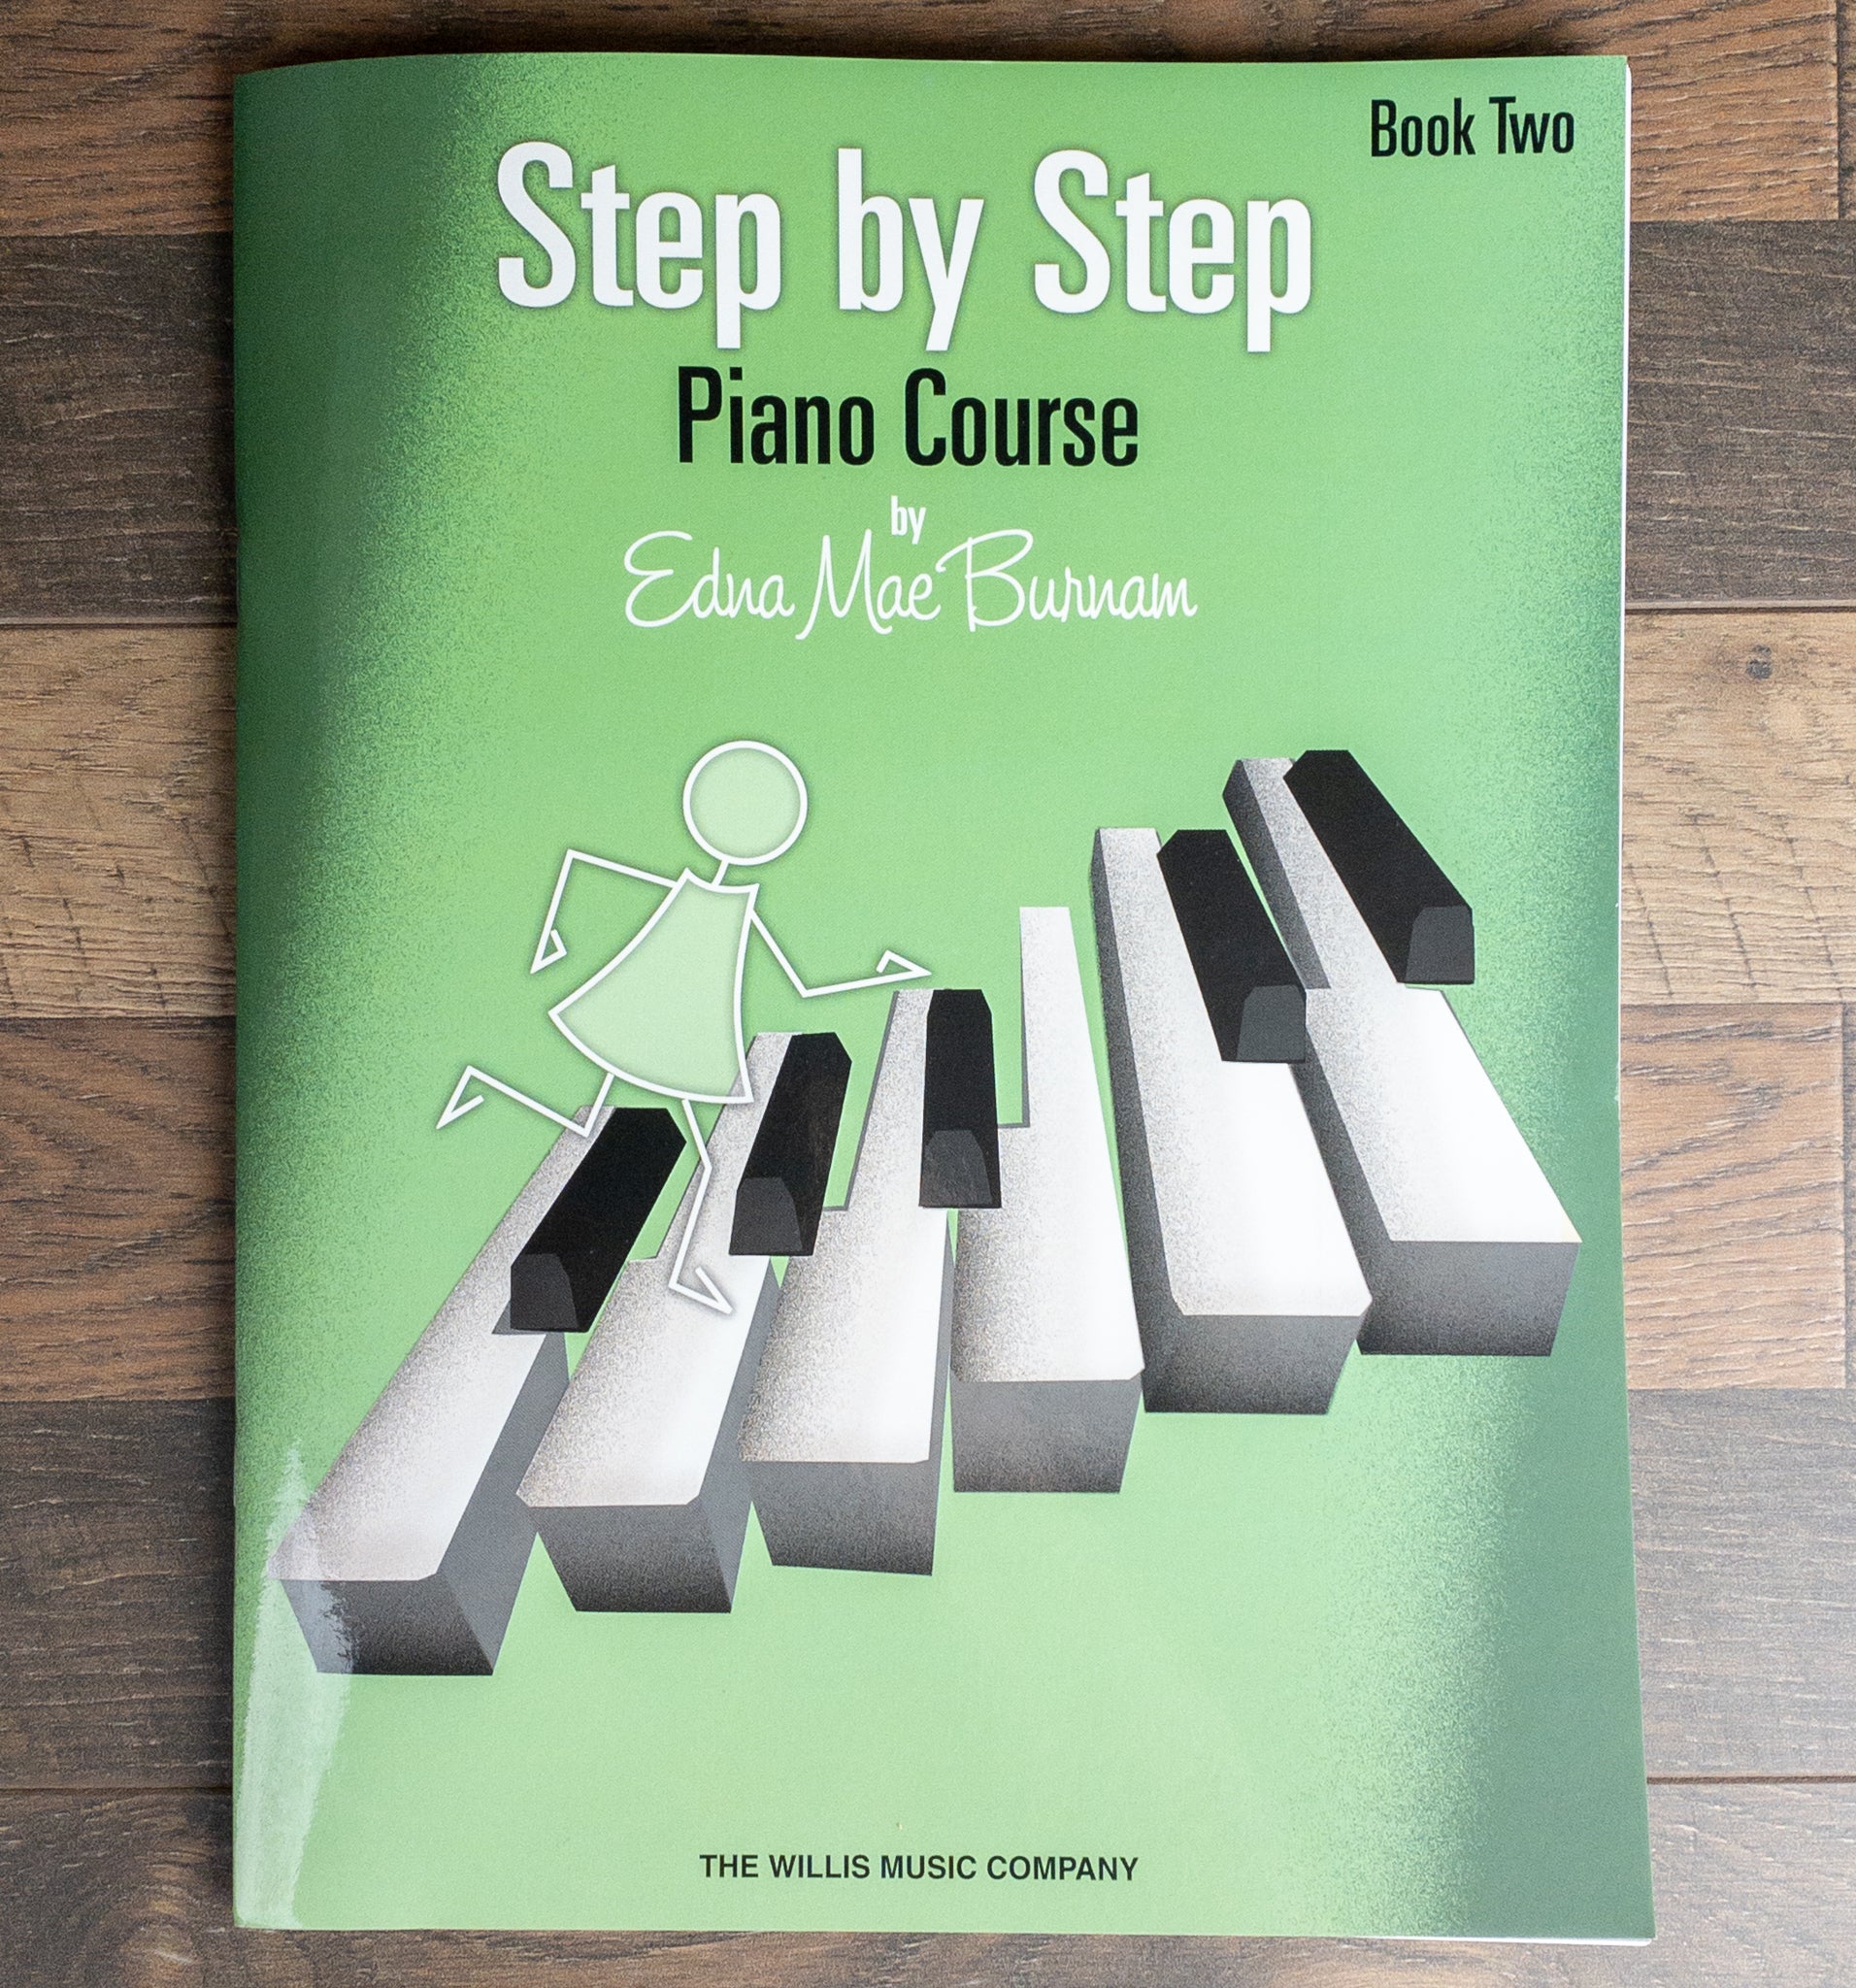 Step by Step Piano Course - Book Two by Edna Mae Burnam Willis Music Company